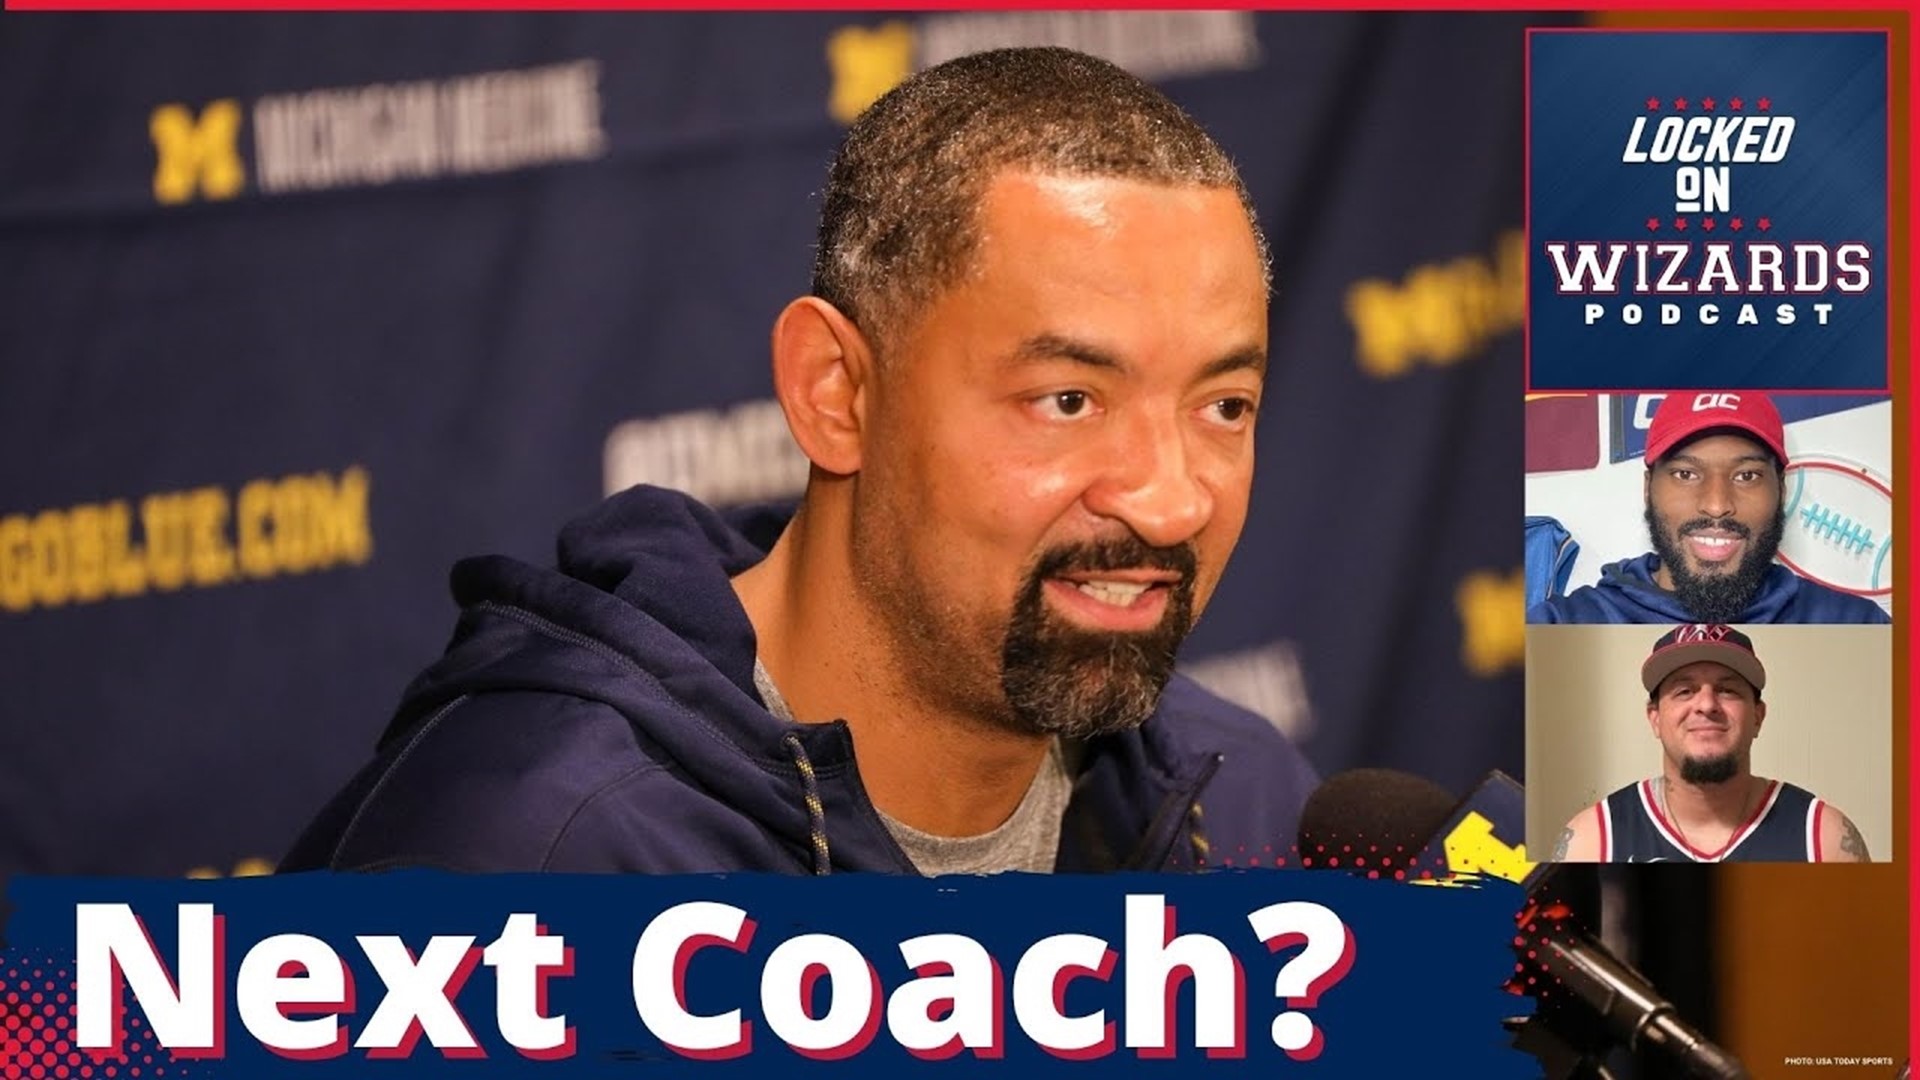 Ed and Brandon answer questions for viewers/Listeners. Who could be the next Head Coach of the Wizards? What is Bilal's ceiling? Over/Under 20 wins?